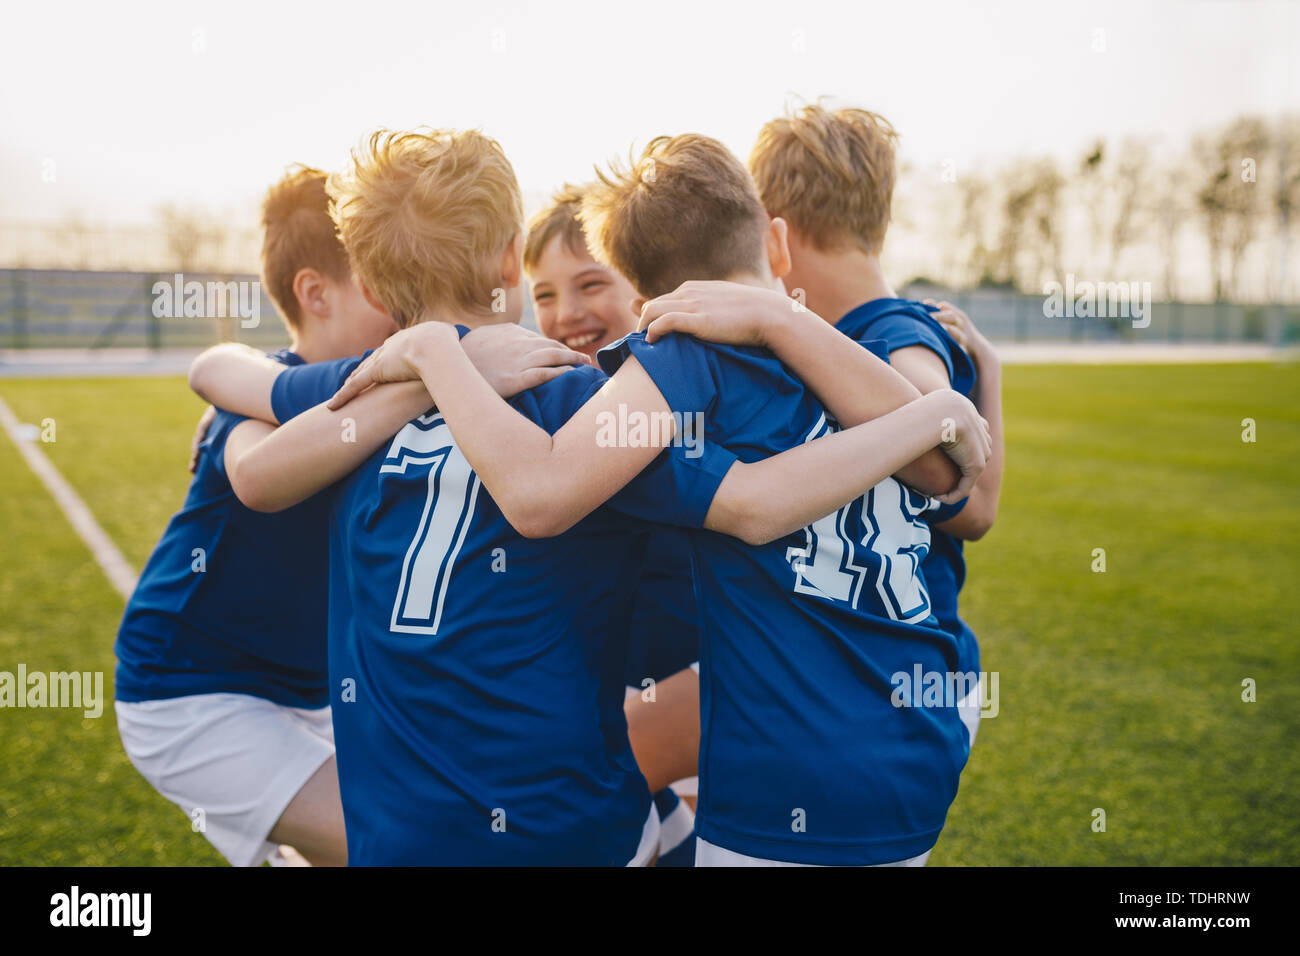 Group of friends happy kids in school sports team. Boys gathering and having fun on sports field. Cheerful children boys players of school soccer team Stock Photo